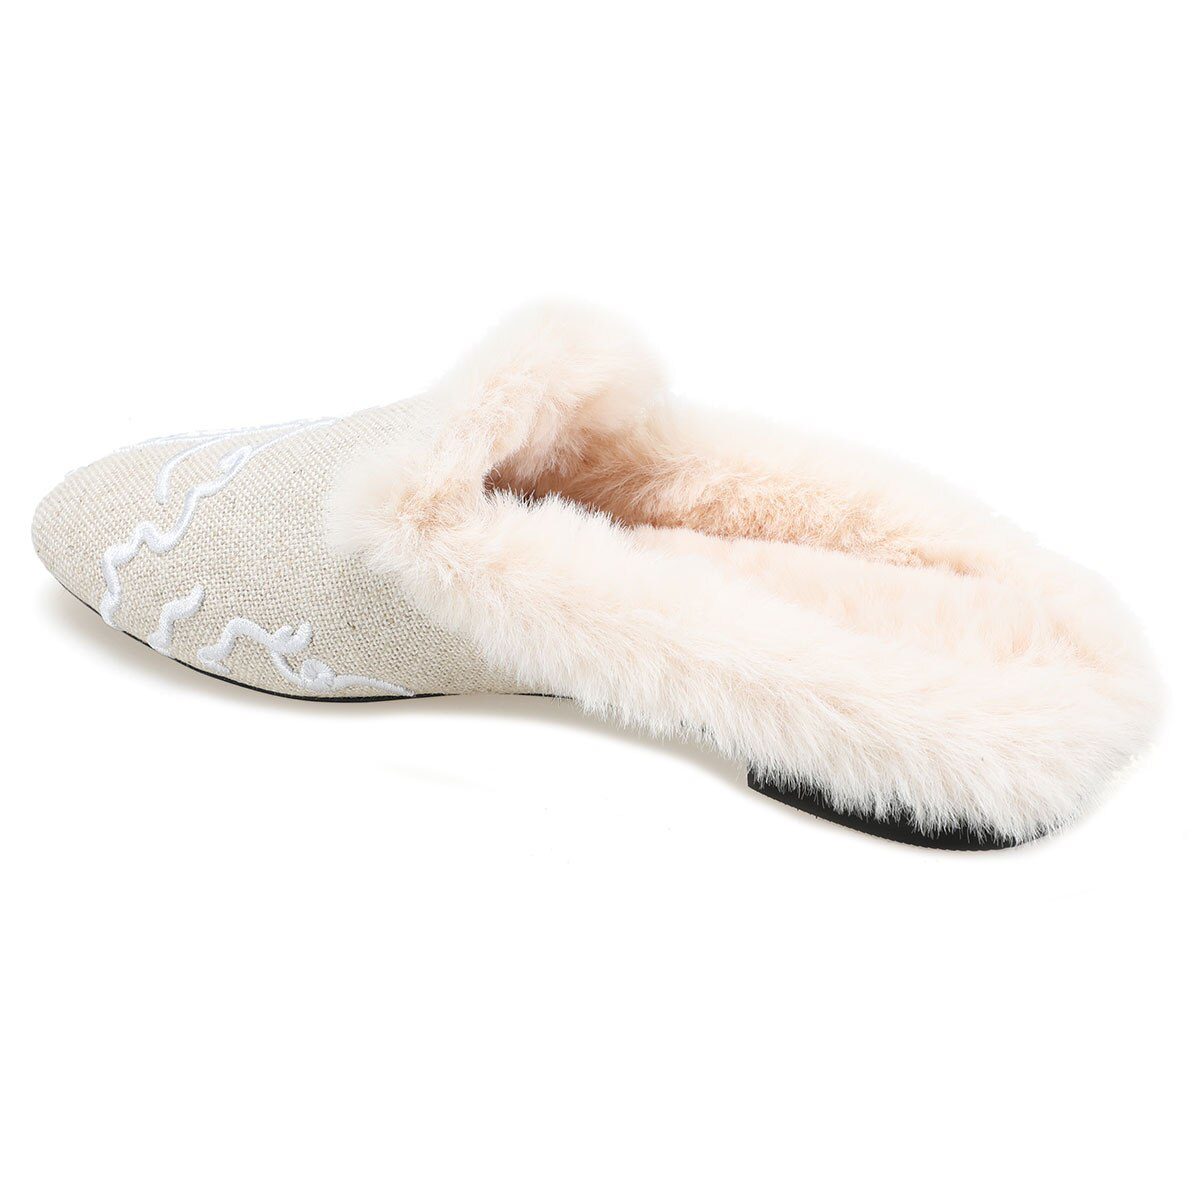 Promotion Arrival Slippers Shoes Flat Home Soft Slip On Female House Faux Bedroom Furry Ladiesindoor Winter 2